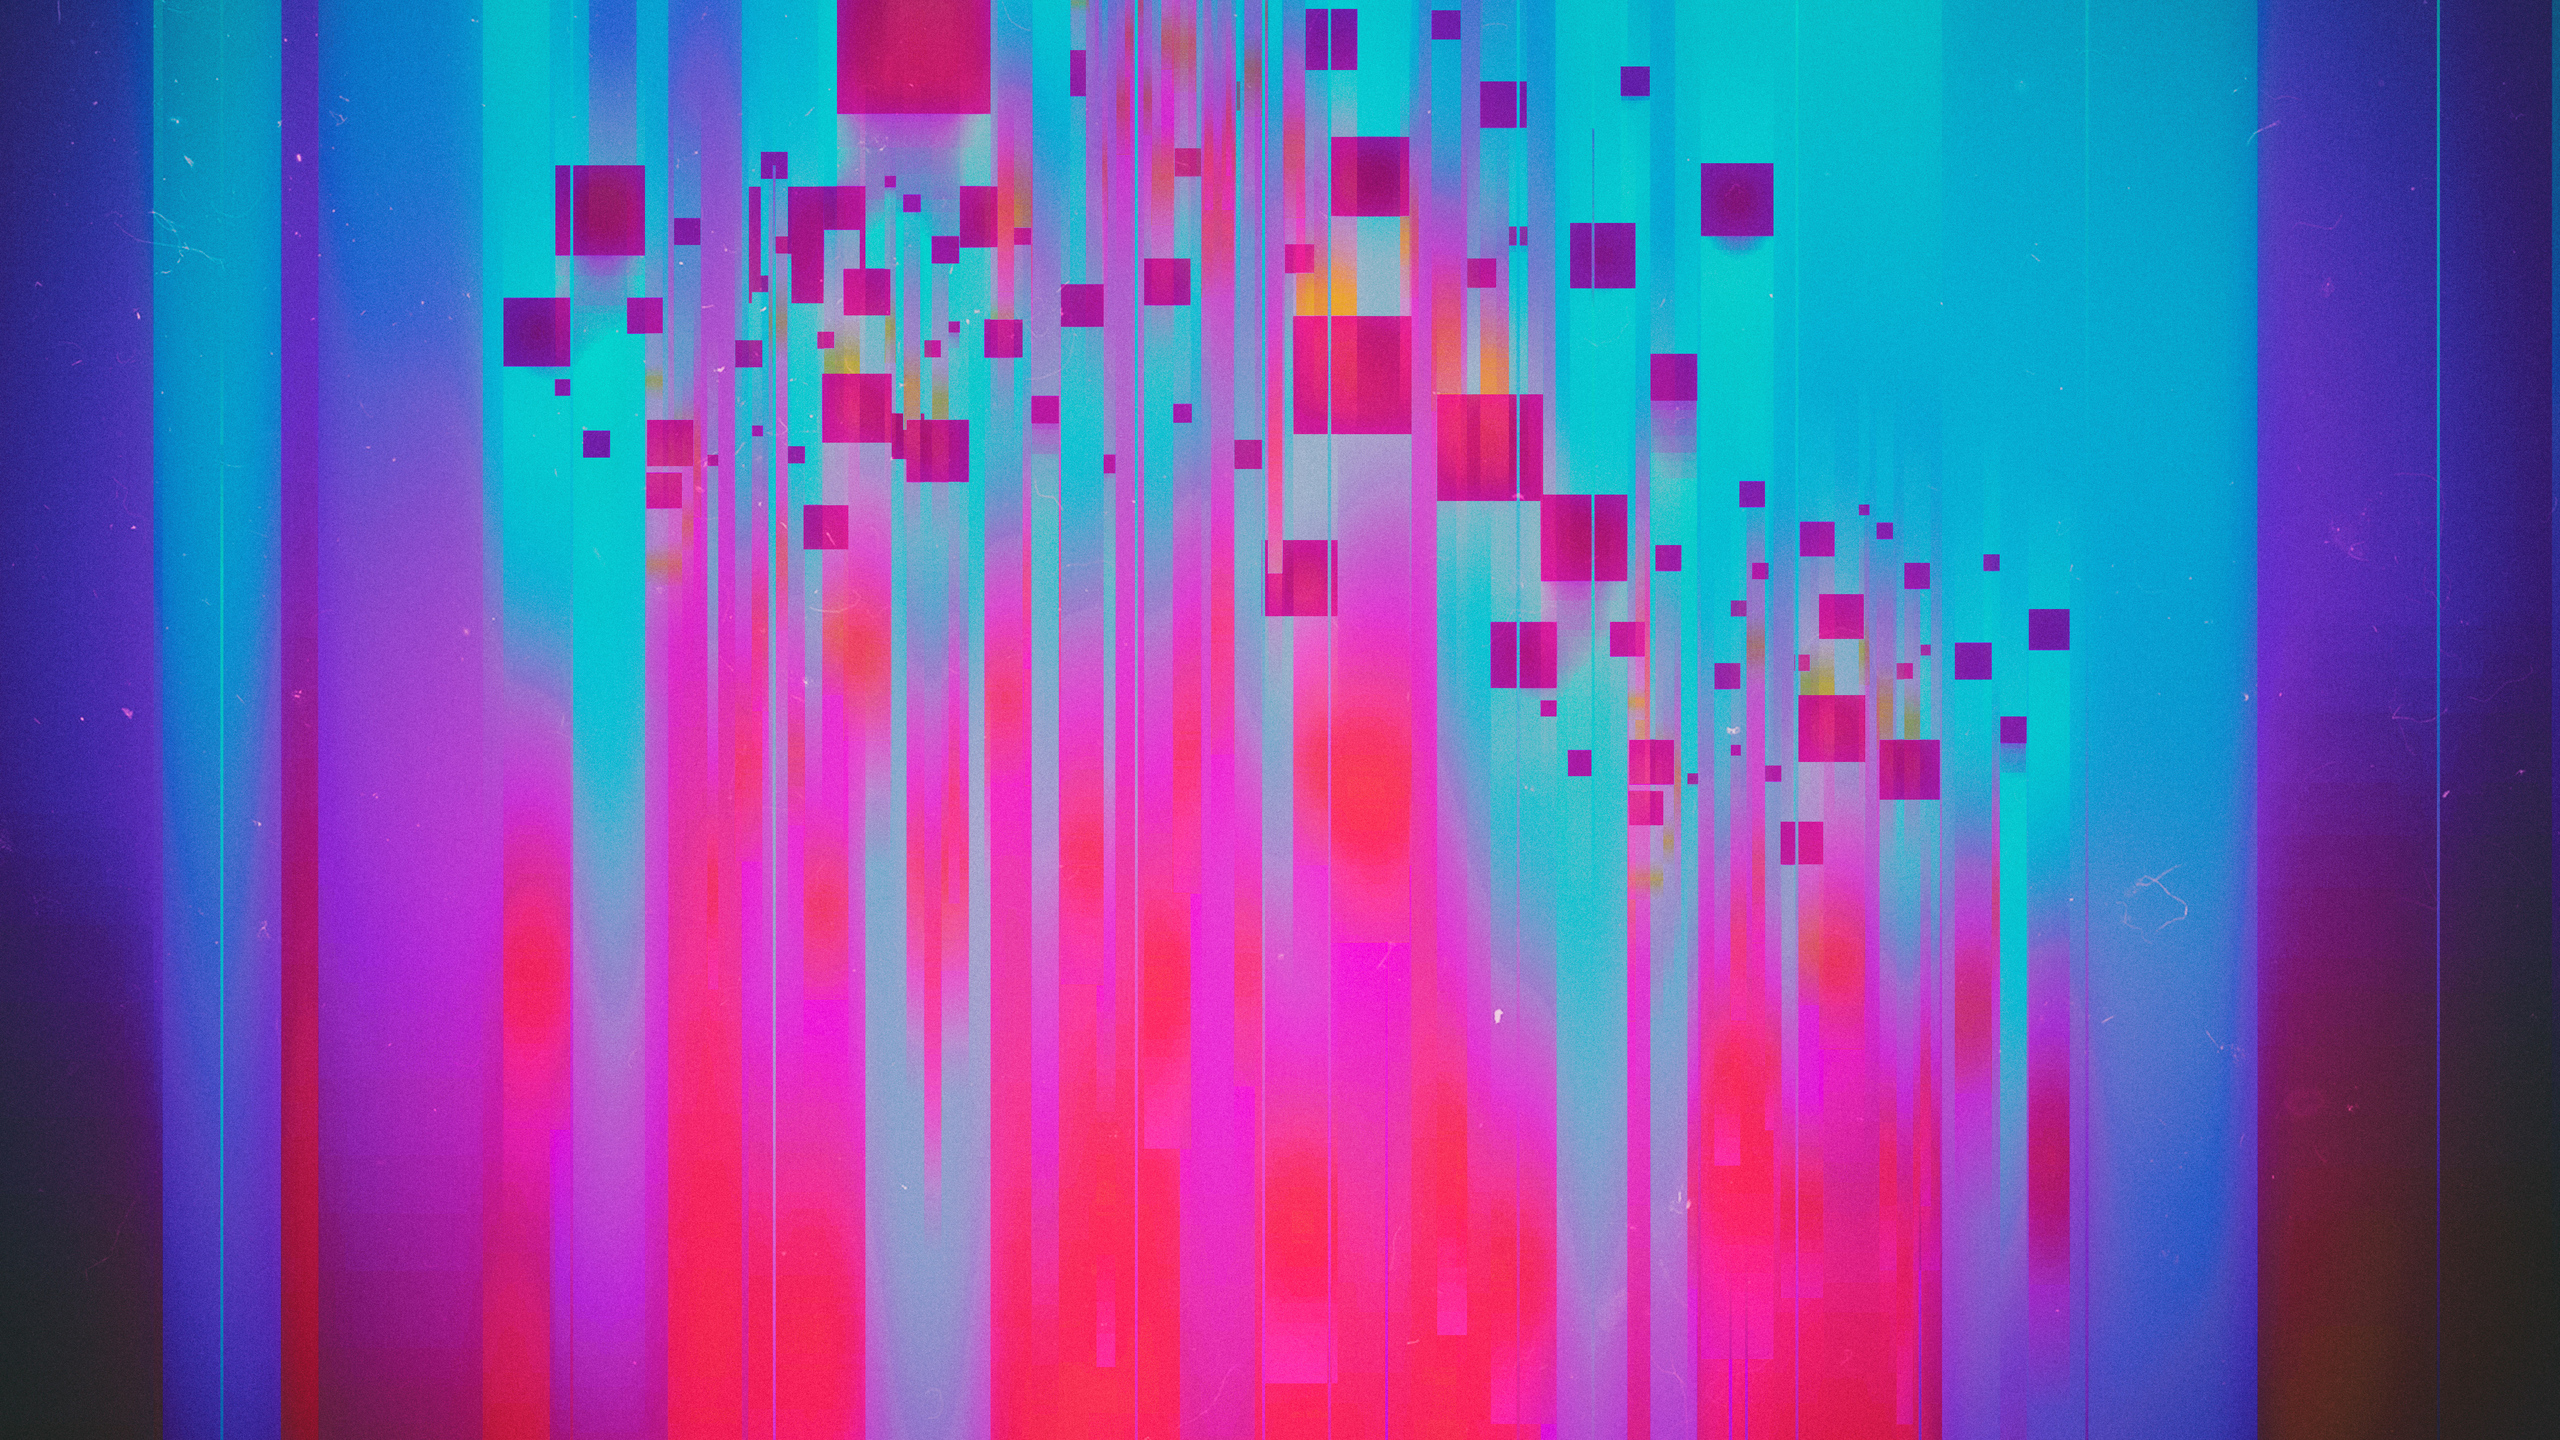 General 2560x1440 abstract square CGI digital art colorful pink blue